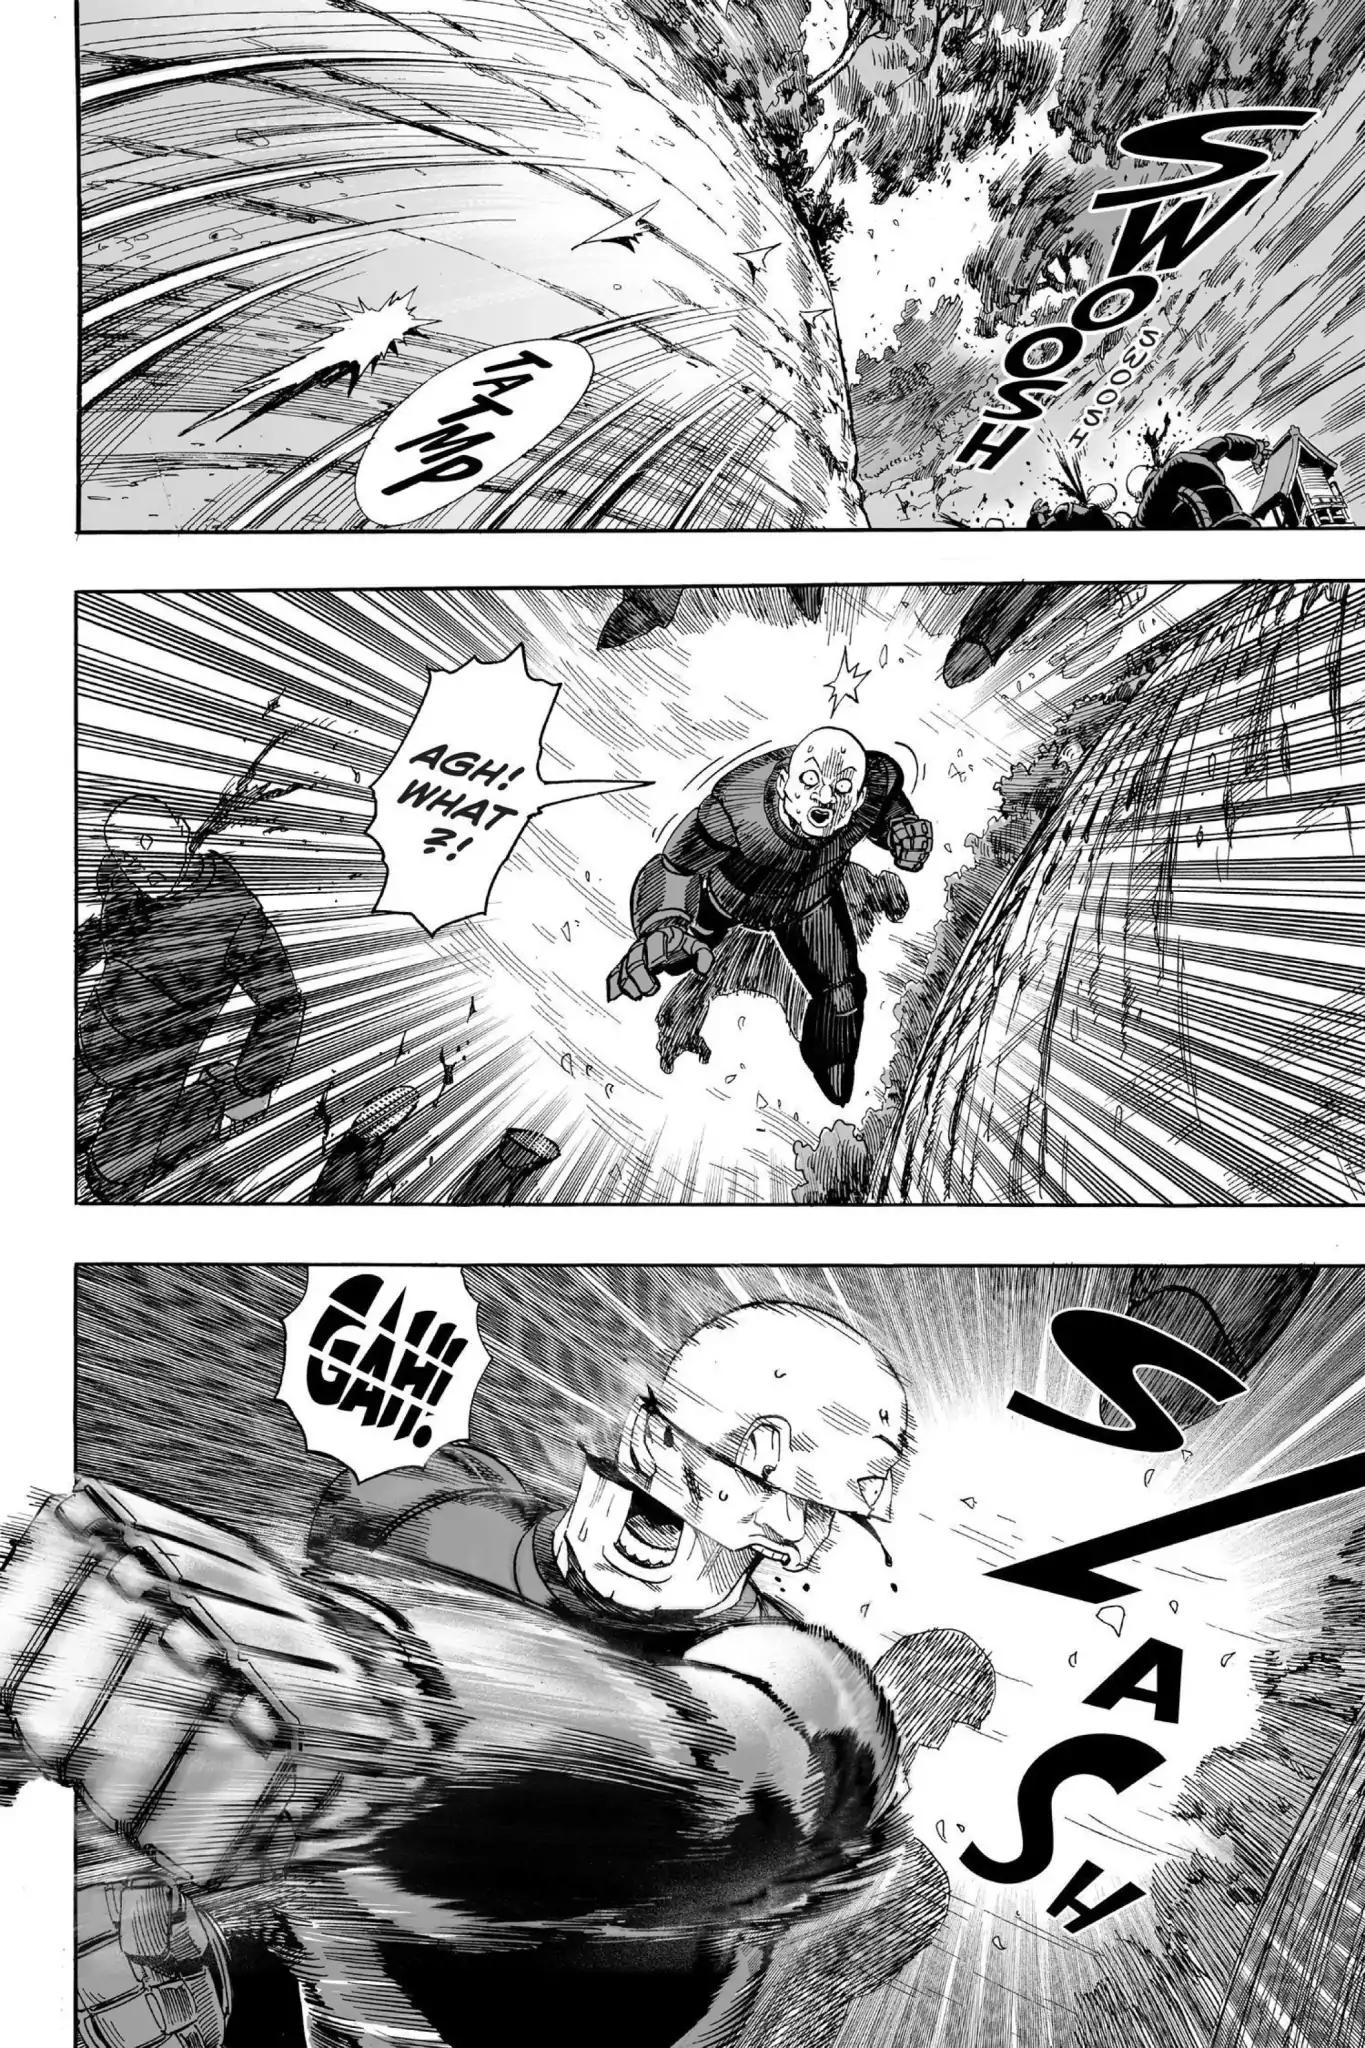 One-Punch Man chapter 13 page 4